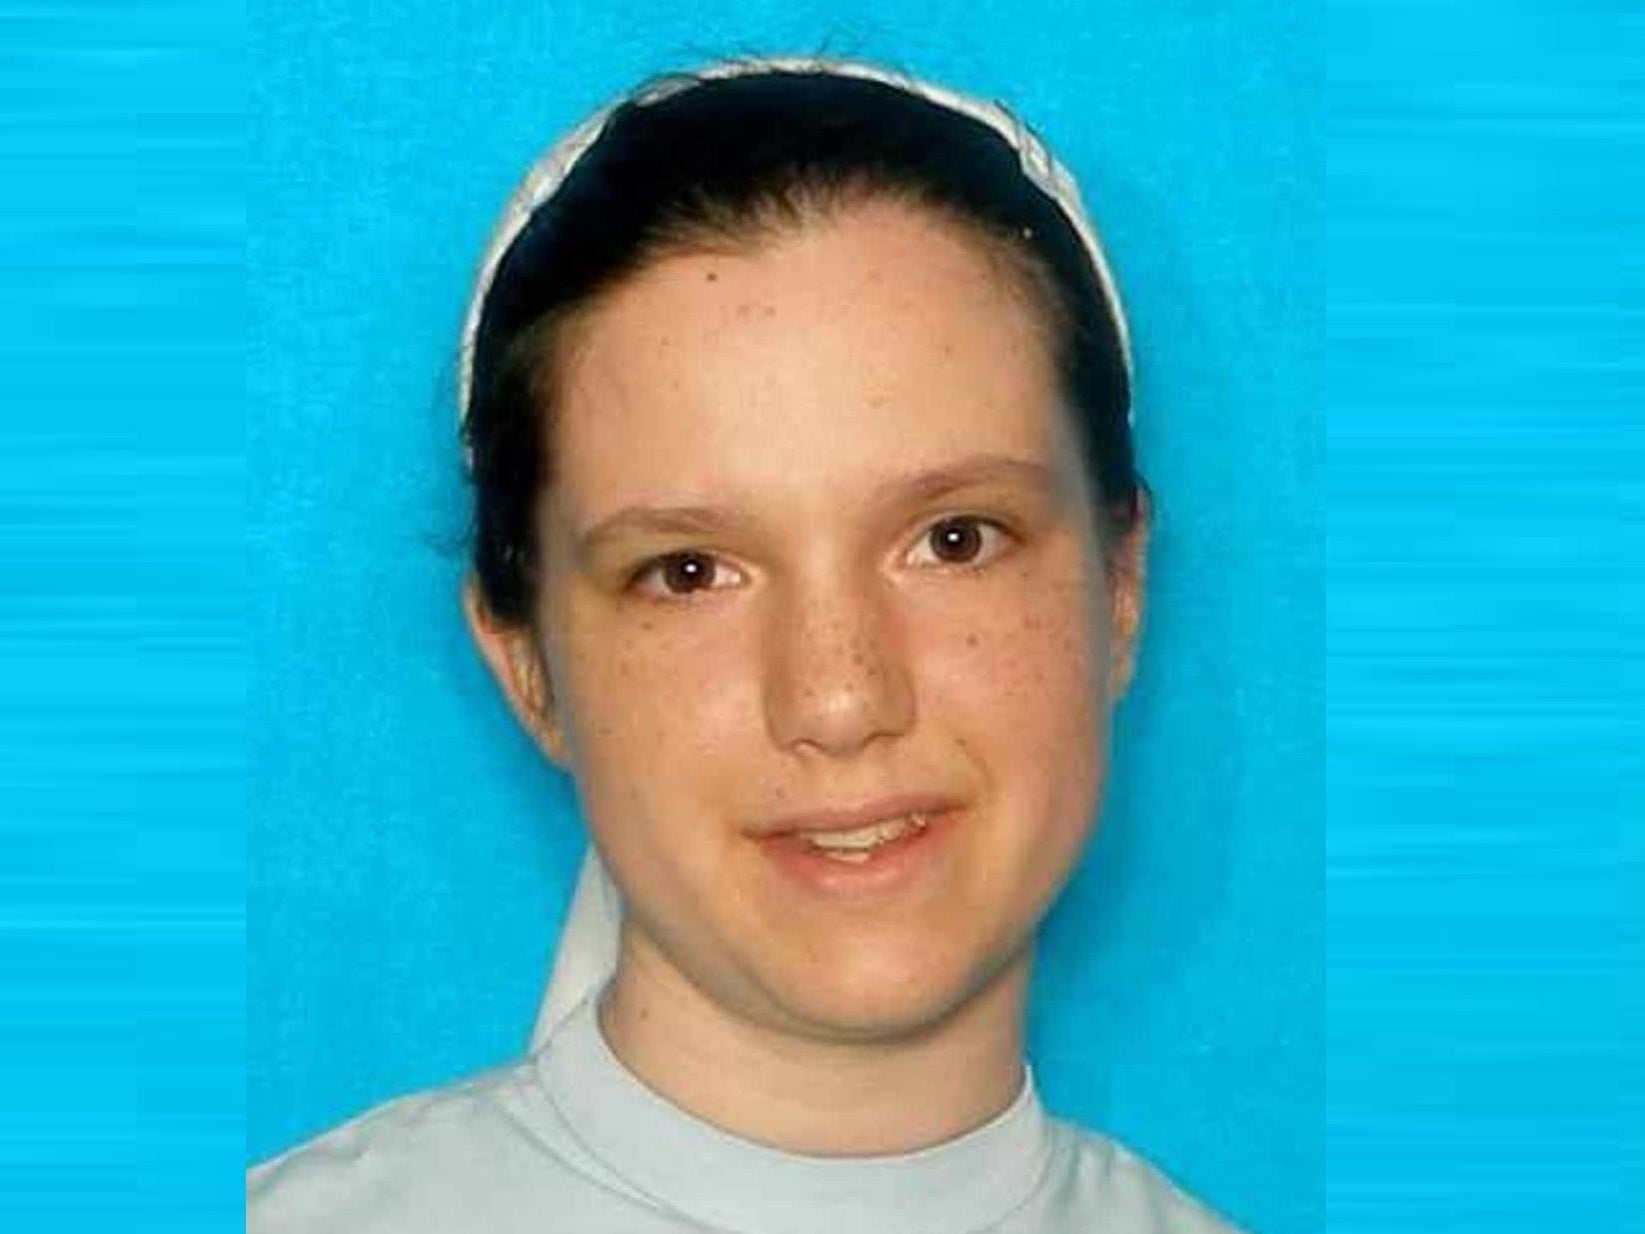 Missing Mennonite woman found murdered 200 miles from New Mexico home